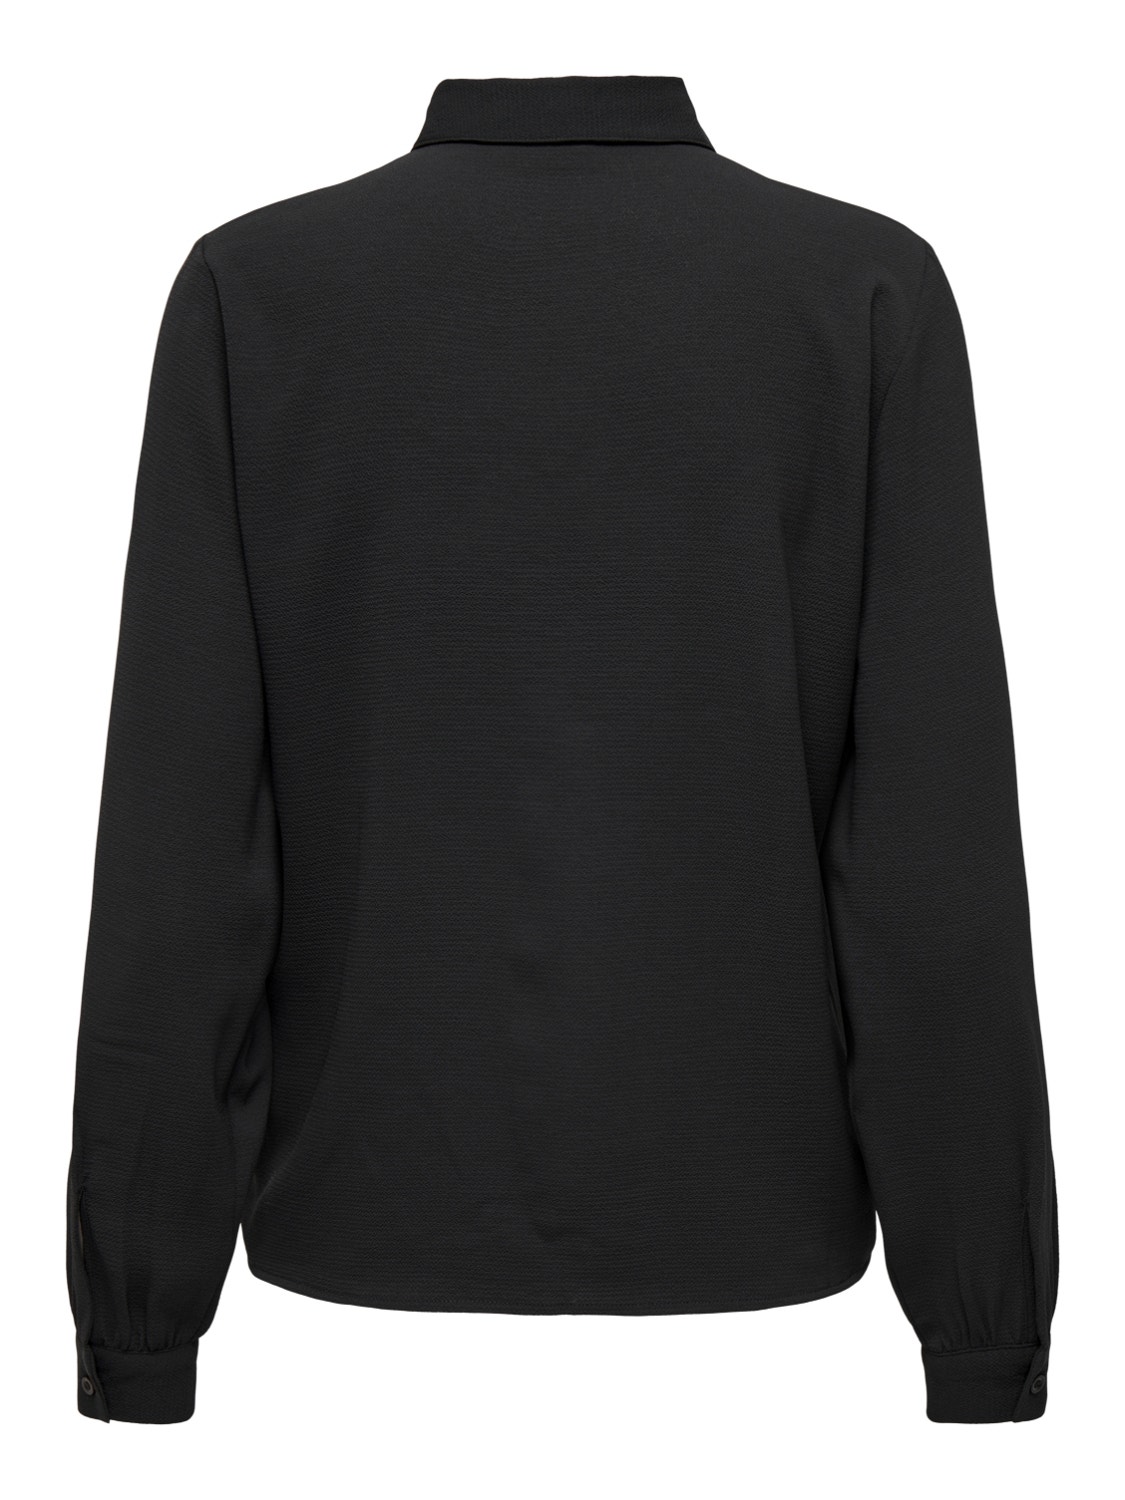 ONLY Classic Long sleeved shirt -Black - 15242870